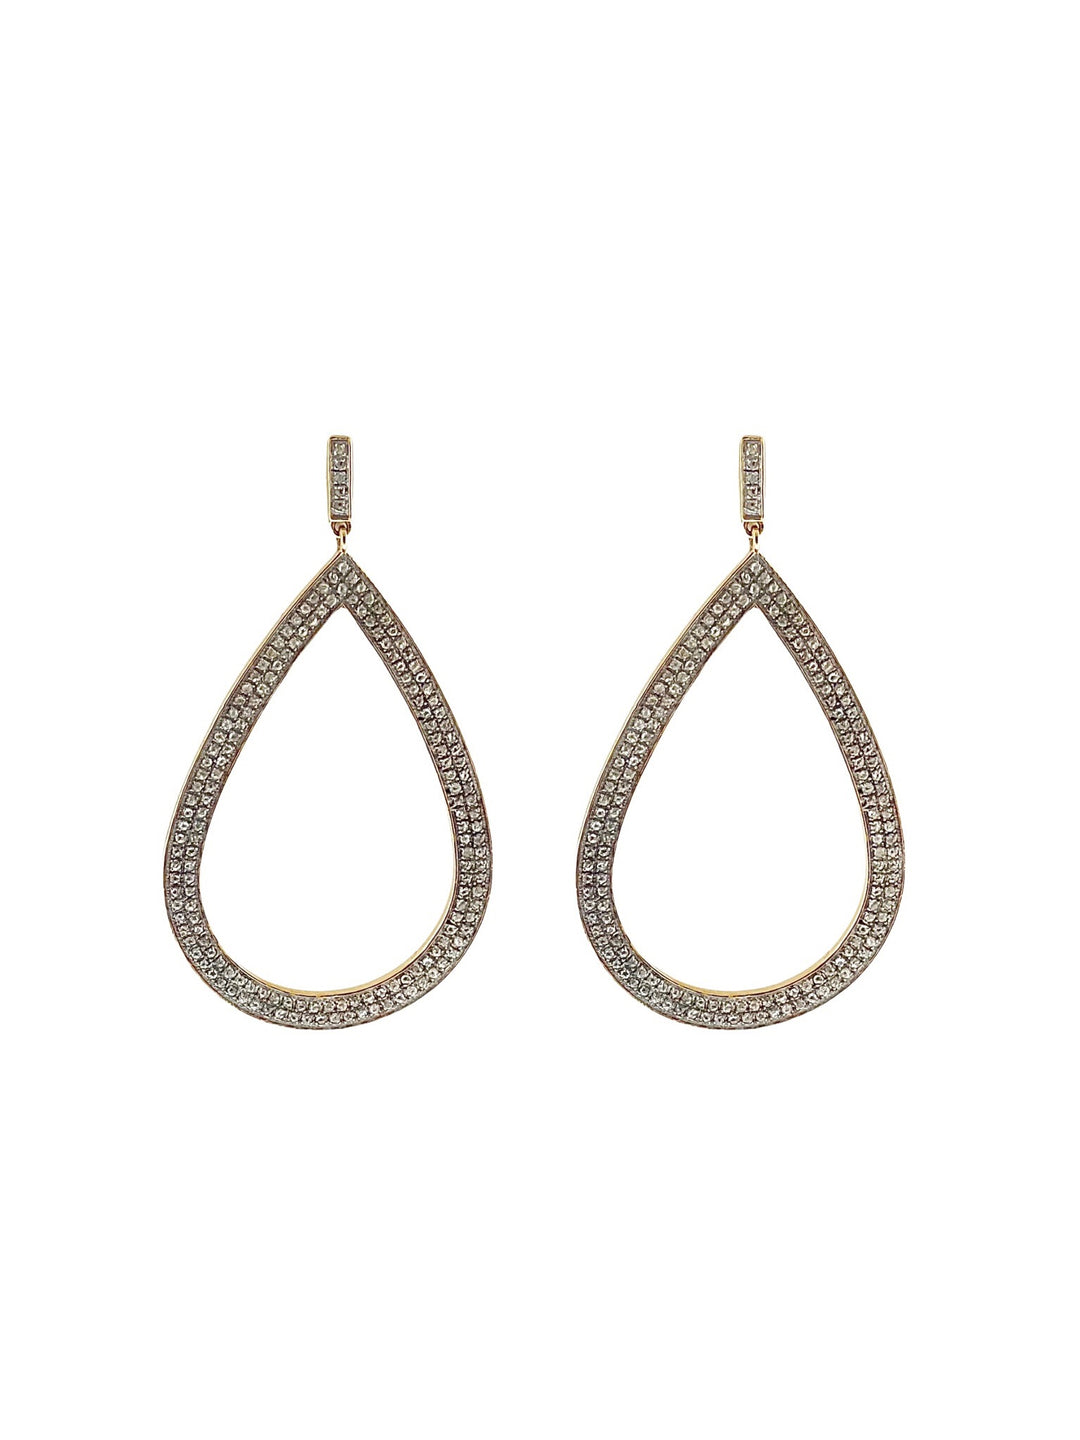 The Woods Fine Jewelry Double Pave Drop Earrings